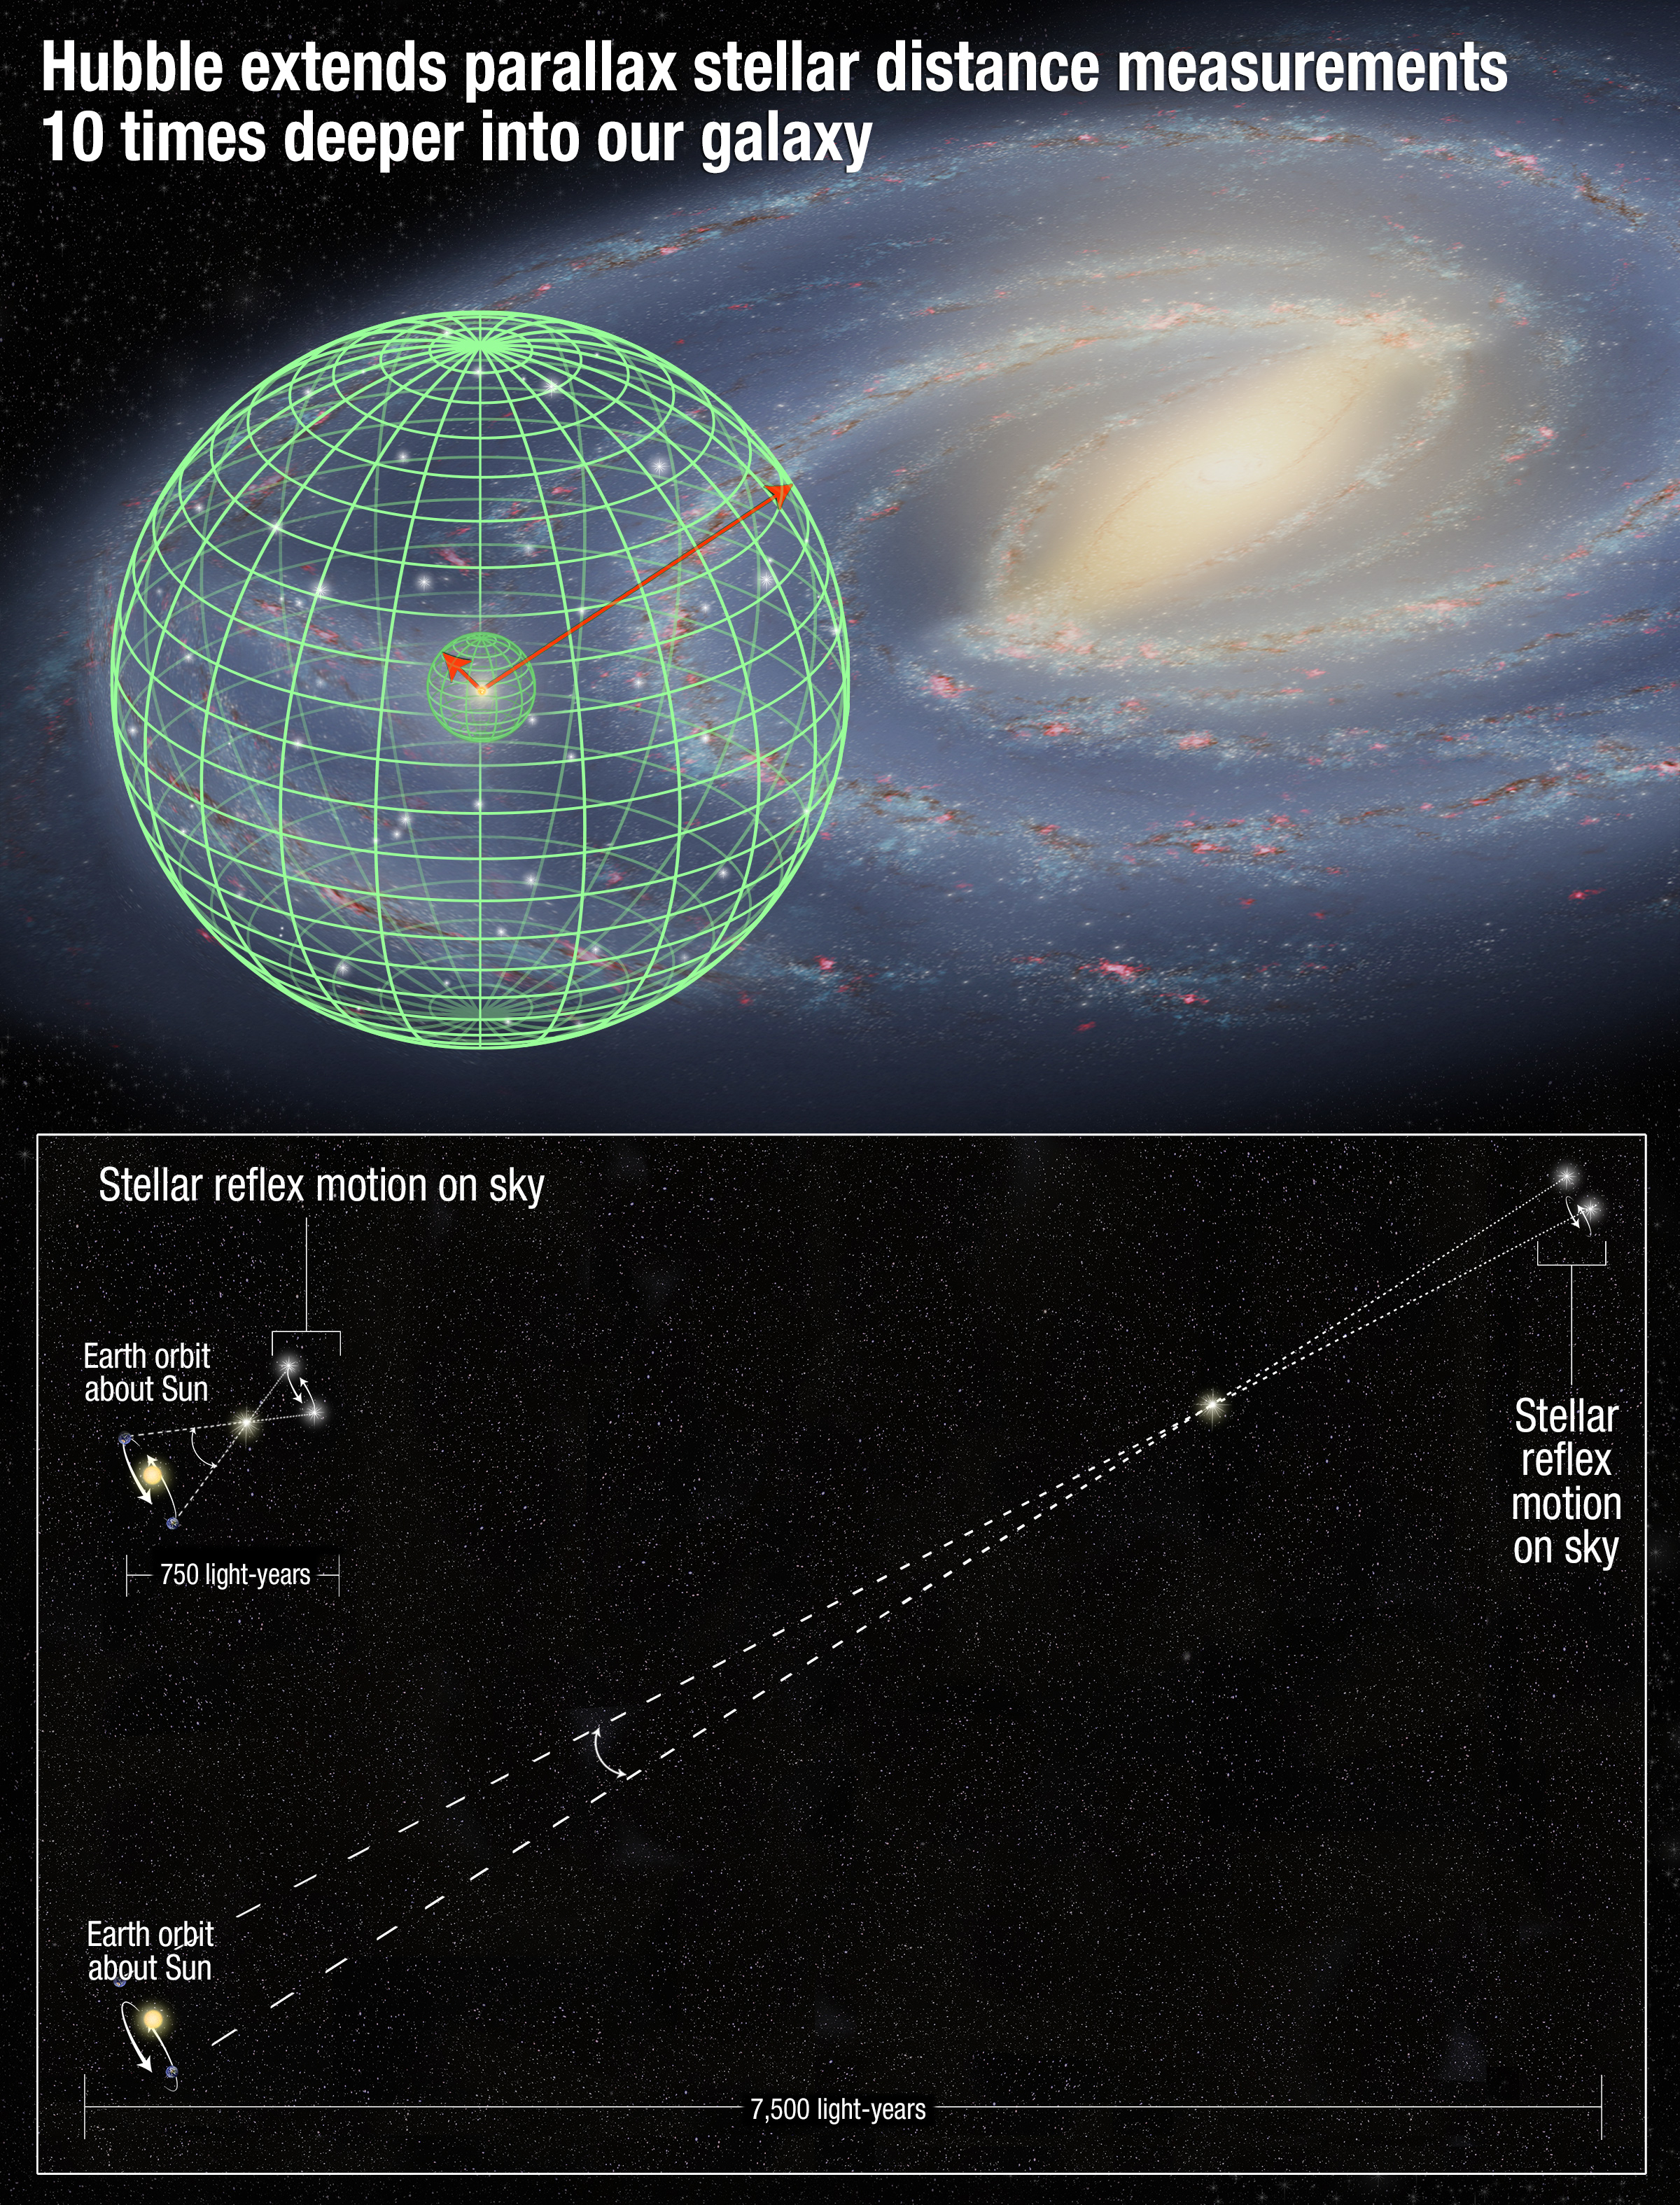 Hubble extends parallax stellar distance measurements 10 times deeper into our galaxy